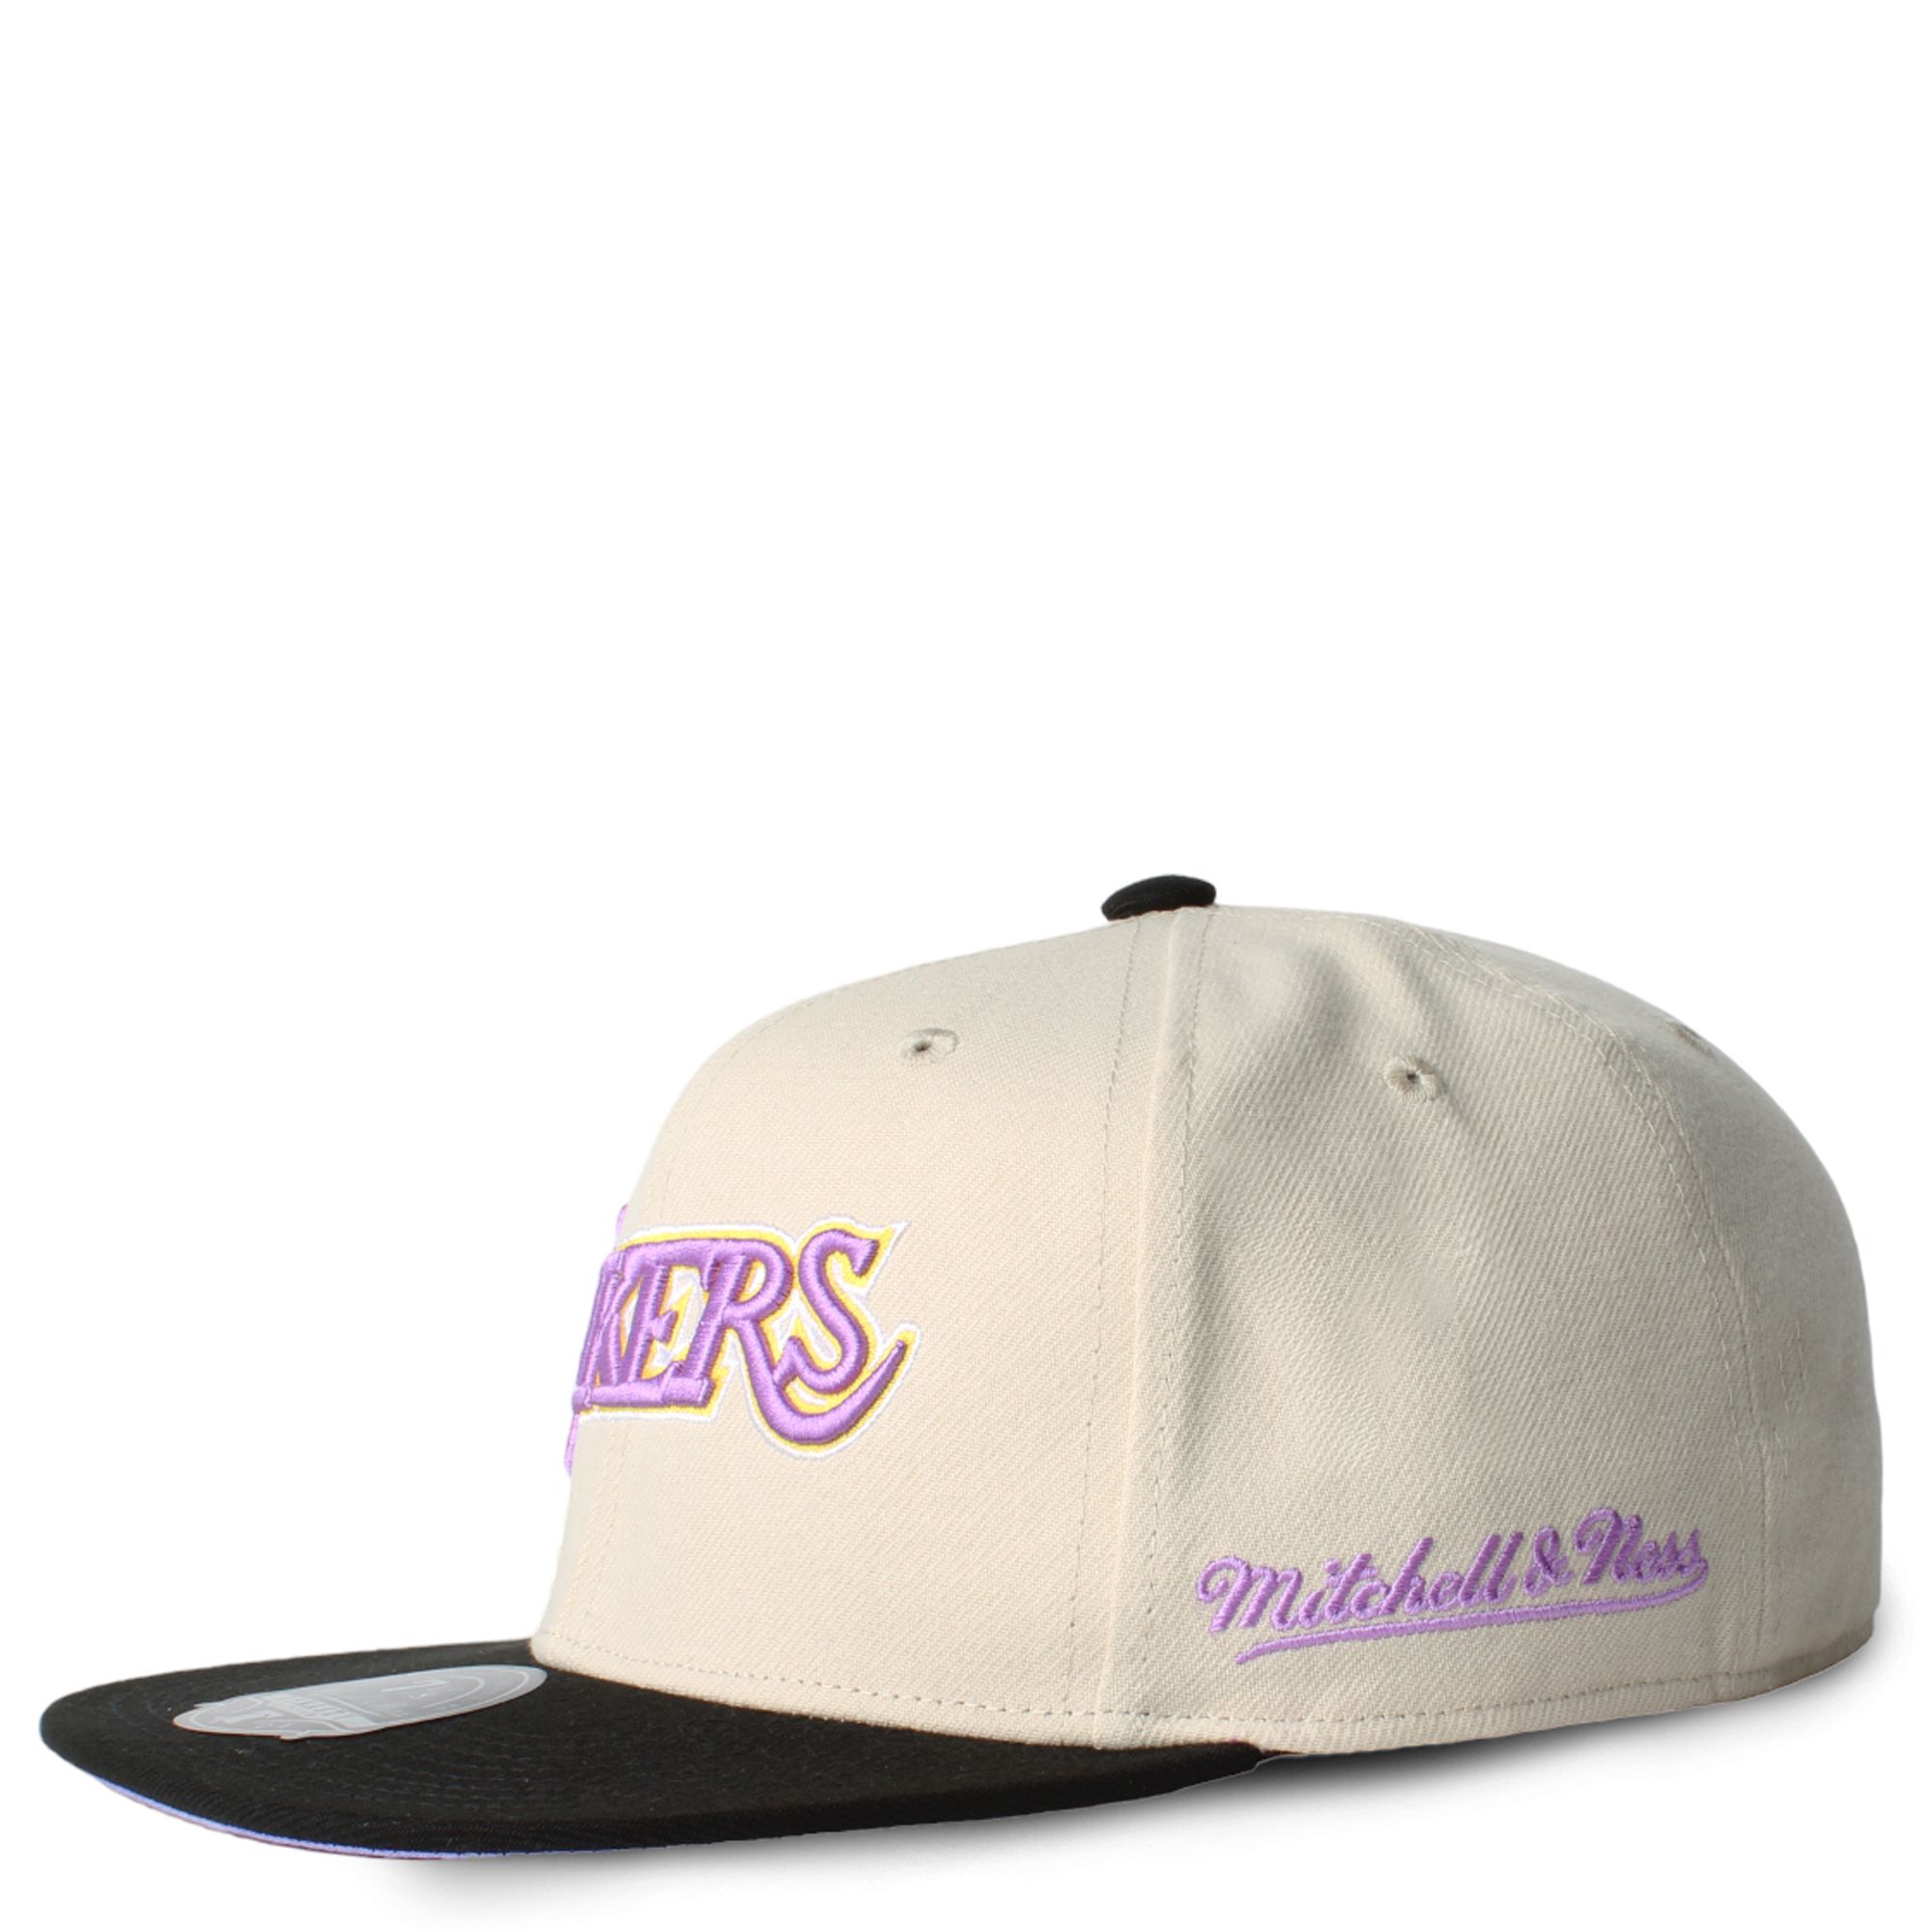 MITCHELL AND NESS Los Angeles Lakers Pastel Fitted Hat HHSF5613